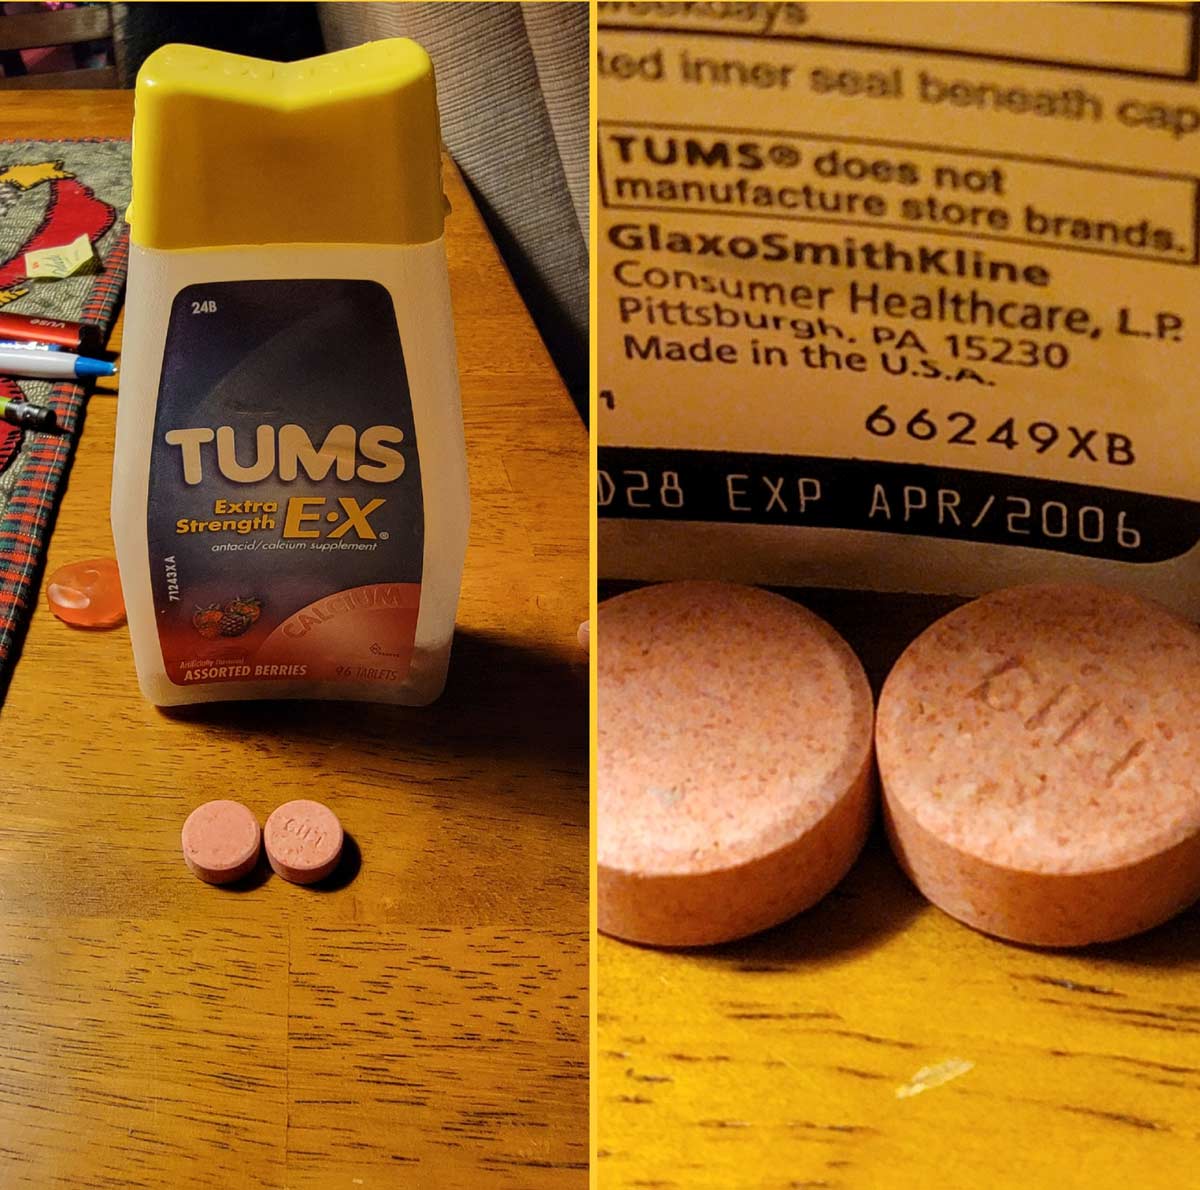 Went to see the family for Christmas and had heartburn. Found Tums in the medicine cabinet..